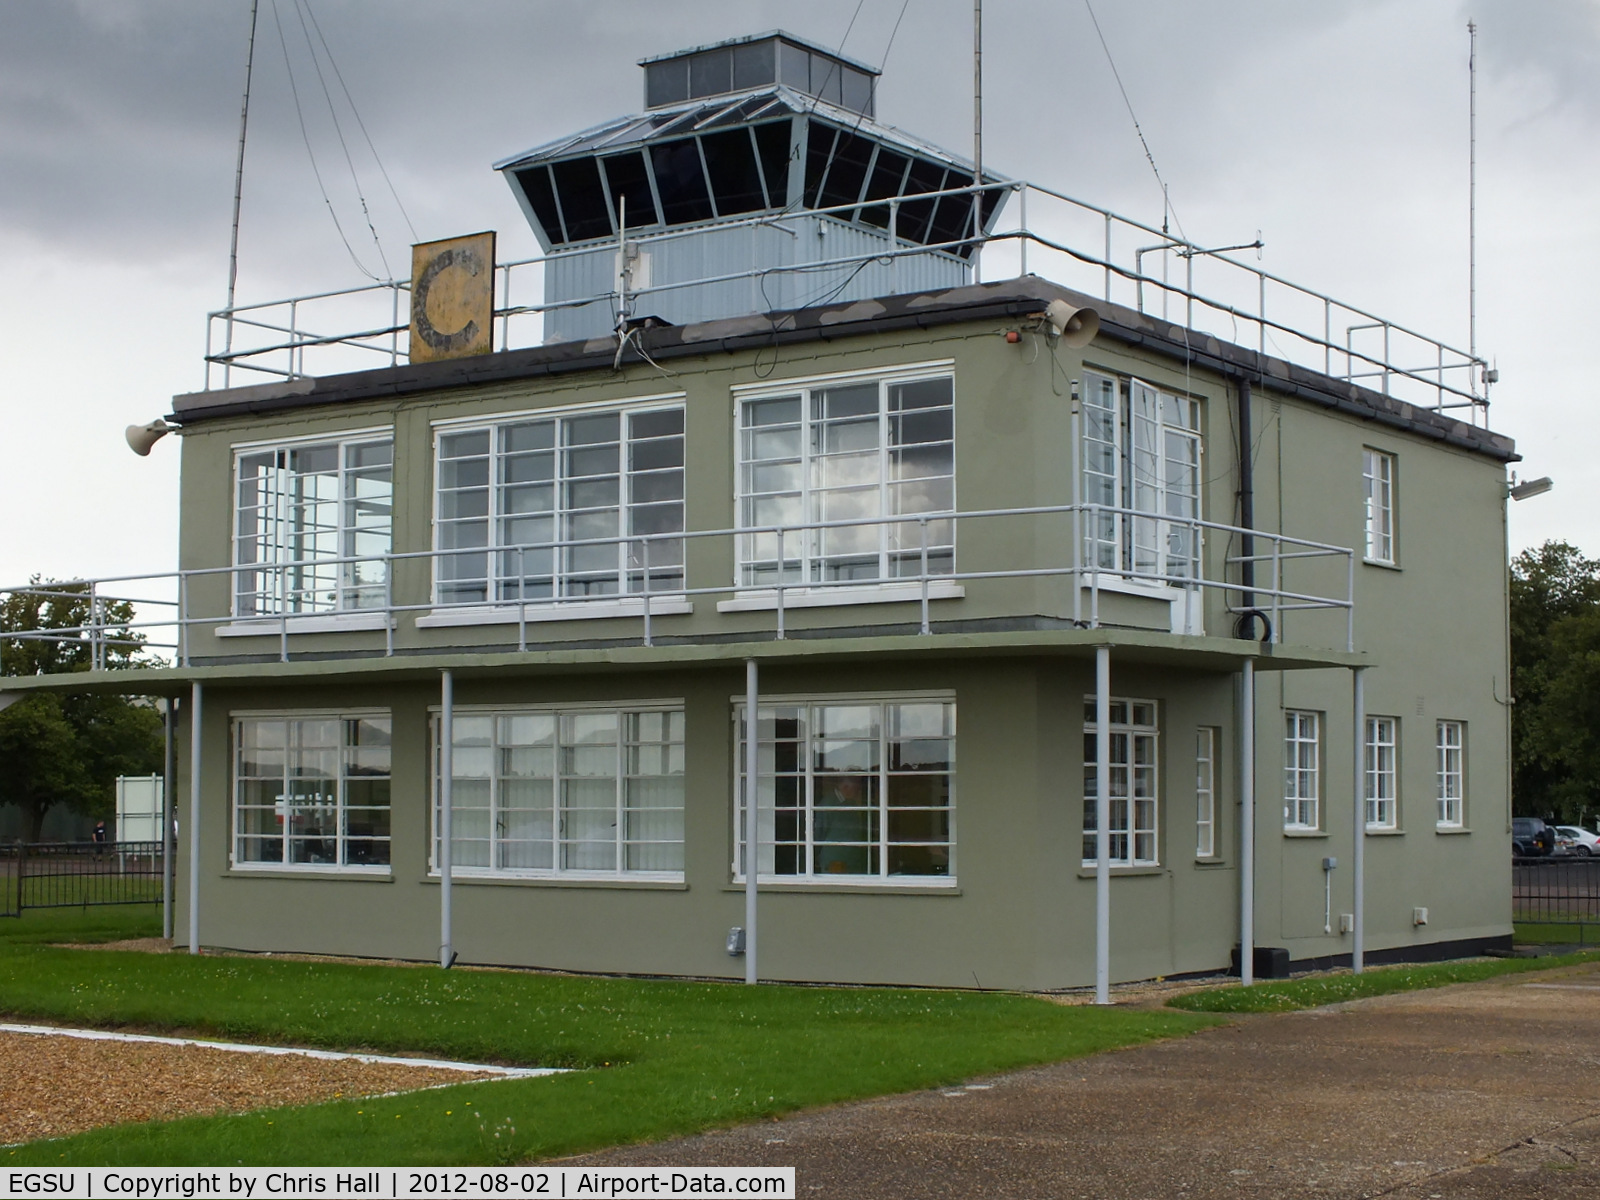 Duxford Airport, Cambridge, England United Kingdom (EGSU) - Duxford tower built in 1941, the rooftop observation post was added later by the 78th Fighter Group